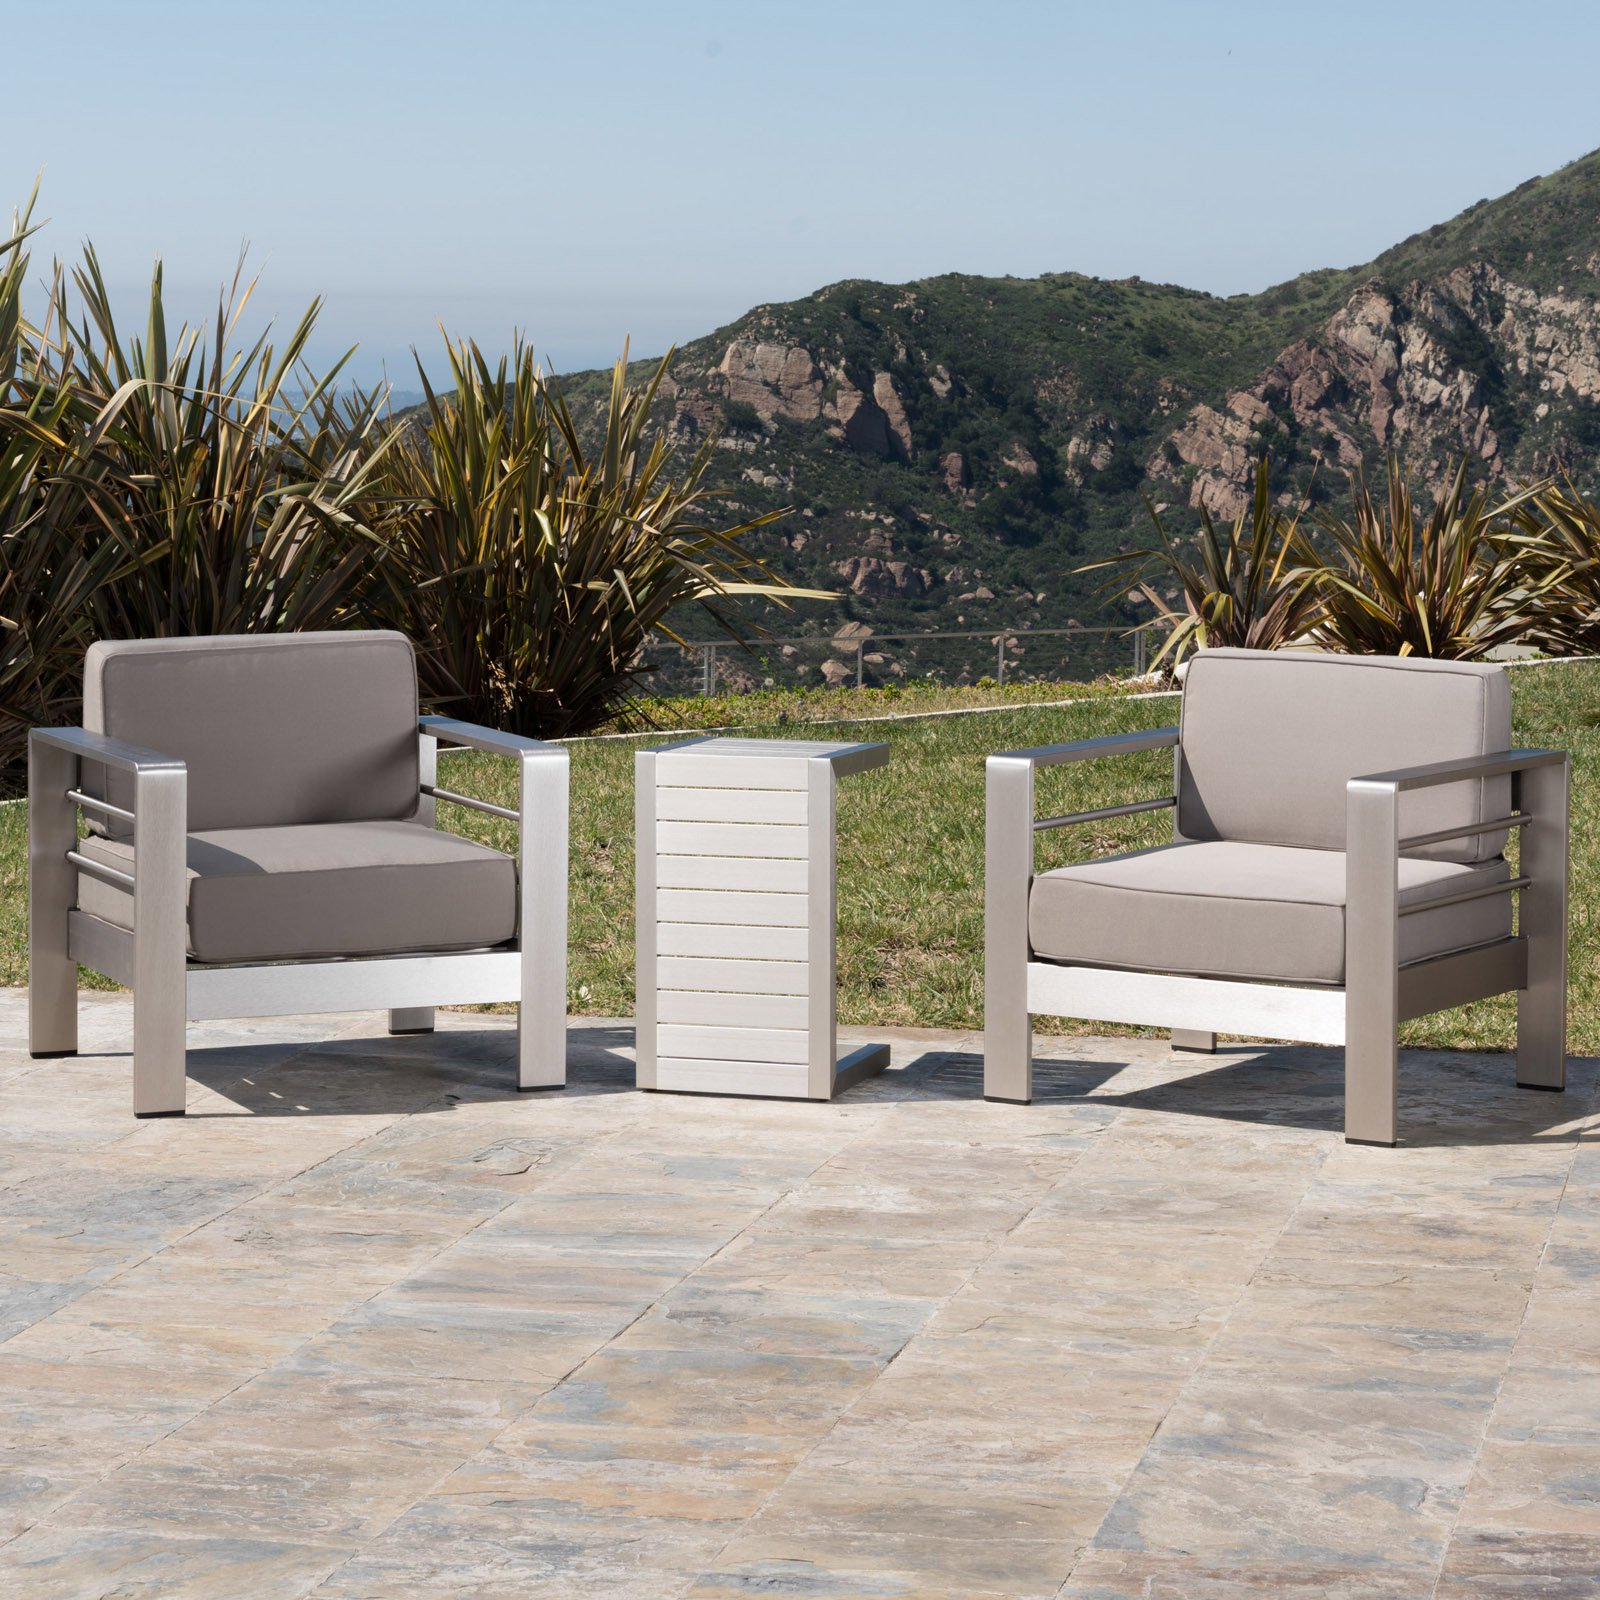 Xane Outdoor Club Chairs with Side Table - Aluminum and Khaki - image 1 of 10